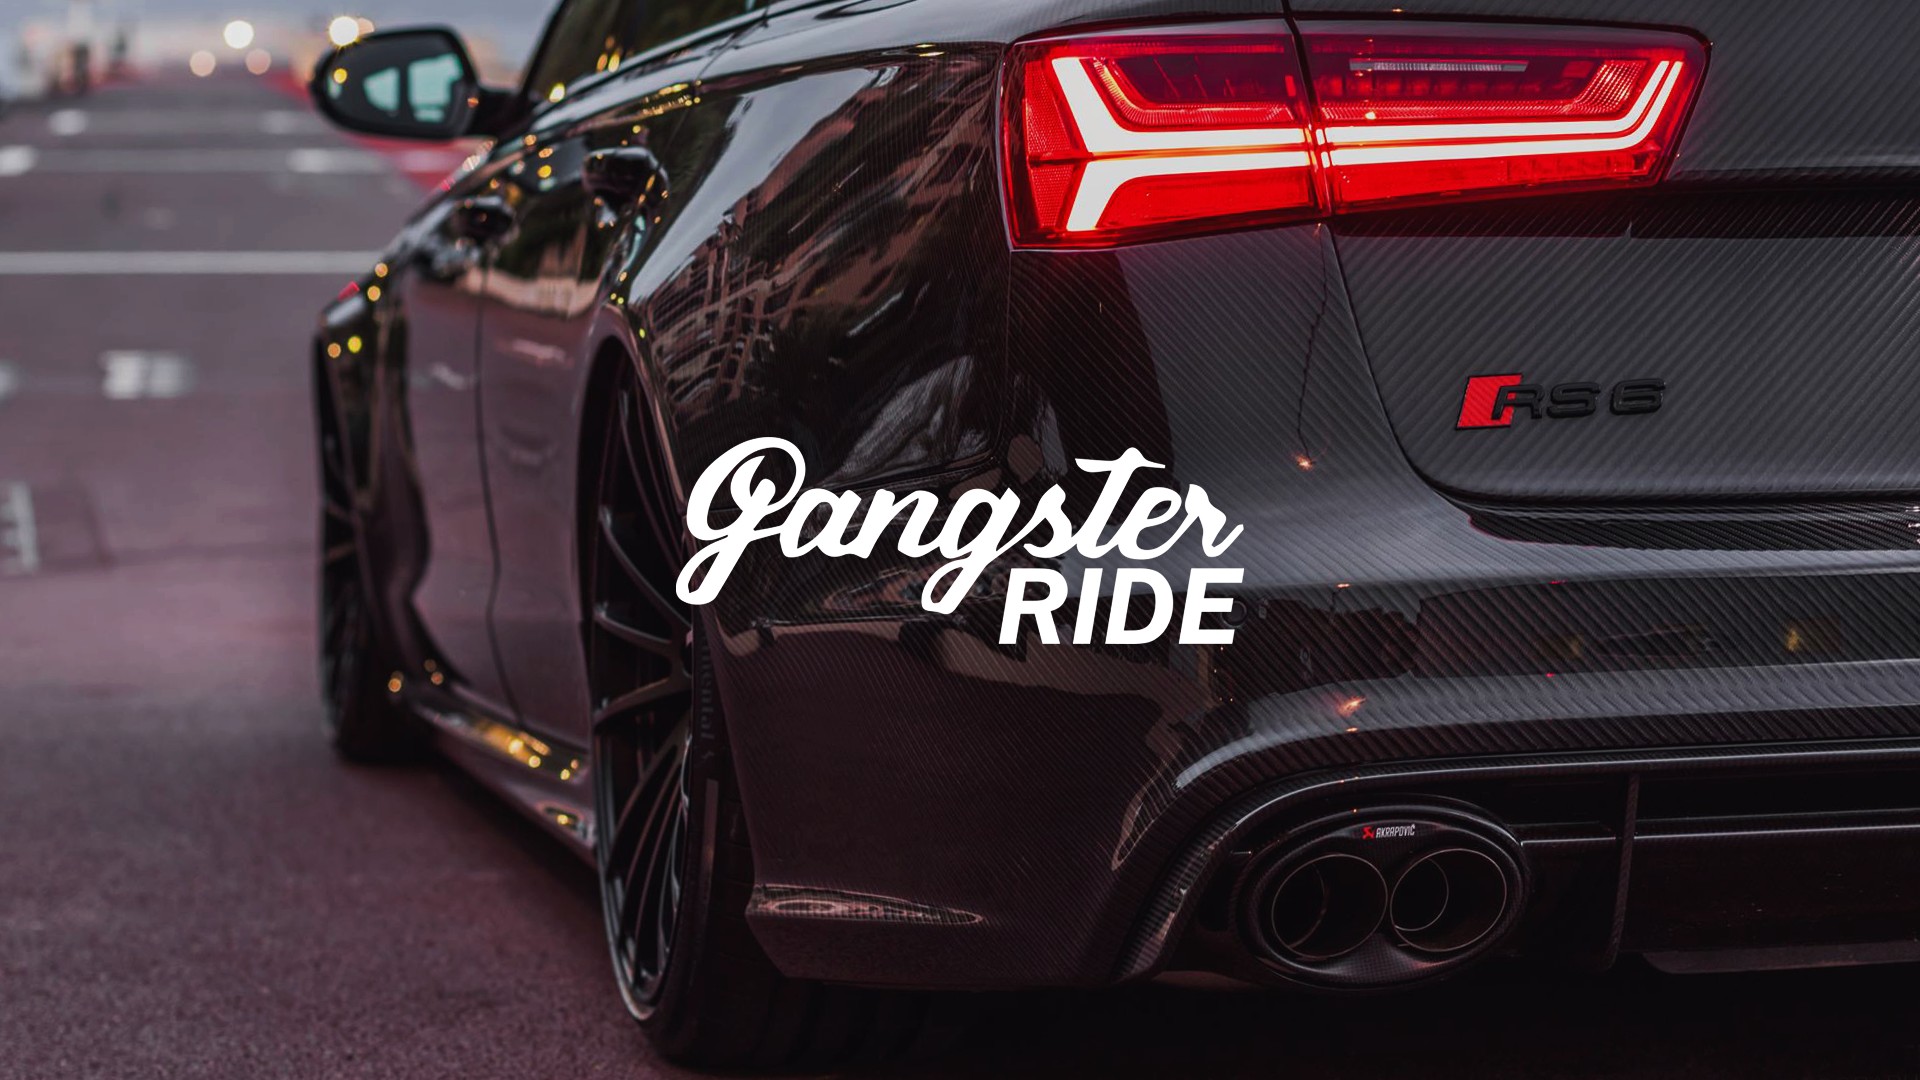 GANGSTER RIDE, Police, Gangsters, Gangster, Smoke, Smoking, Lowrider, BMX, Mask, Gas masks, BMW, Car, Colorful, YouTube Wallpaper